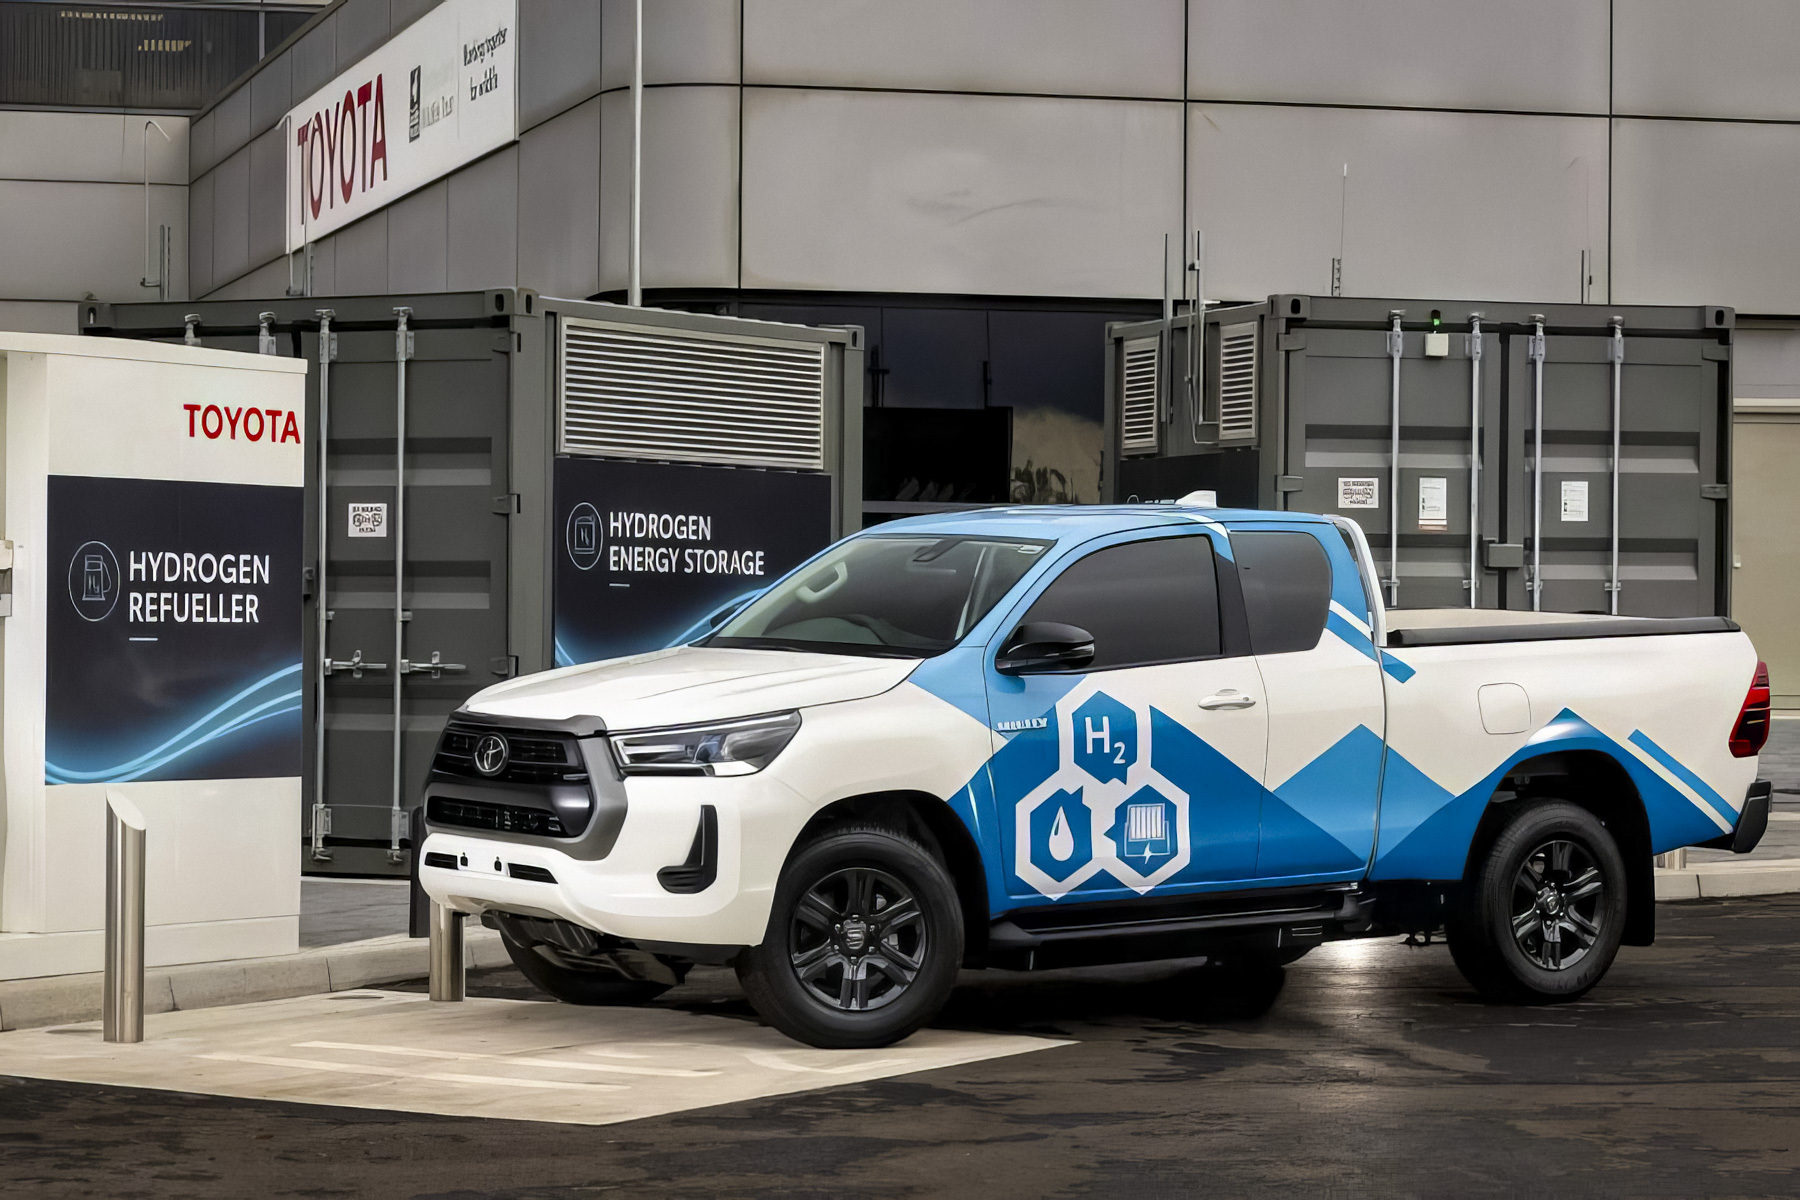 Pickup truck Toyota Hilux transferred to hydrogen